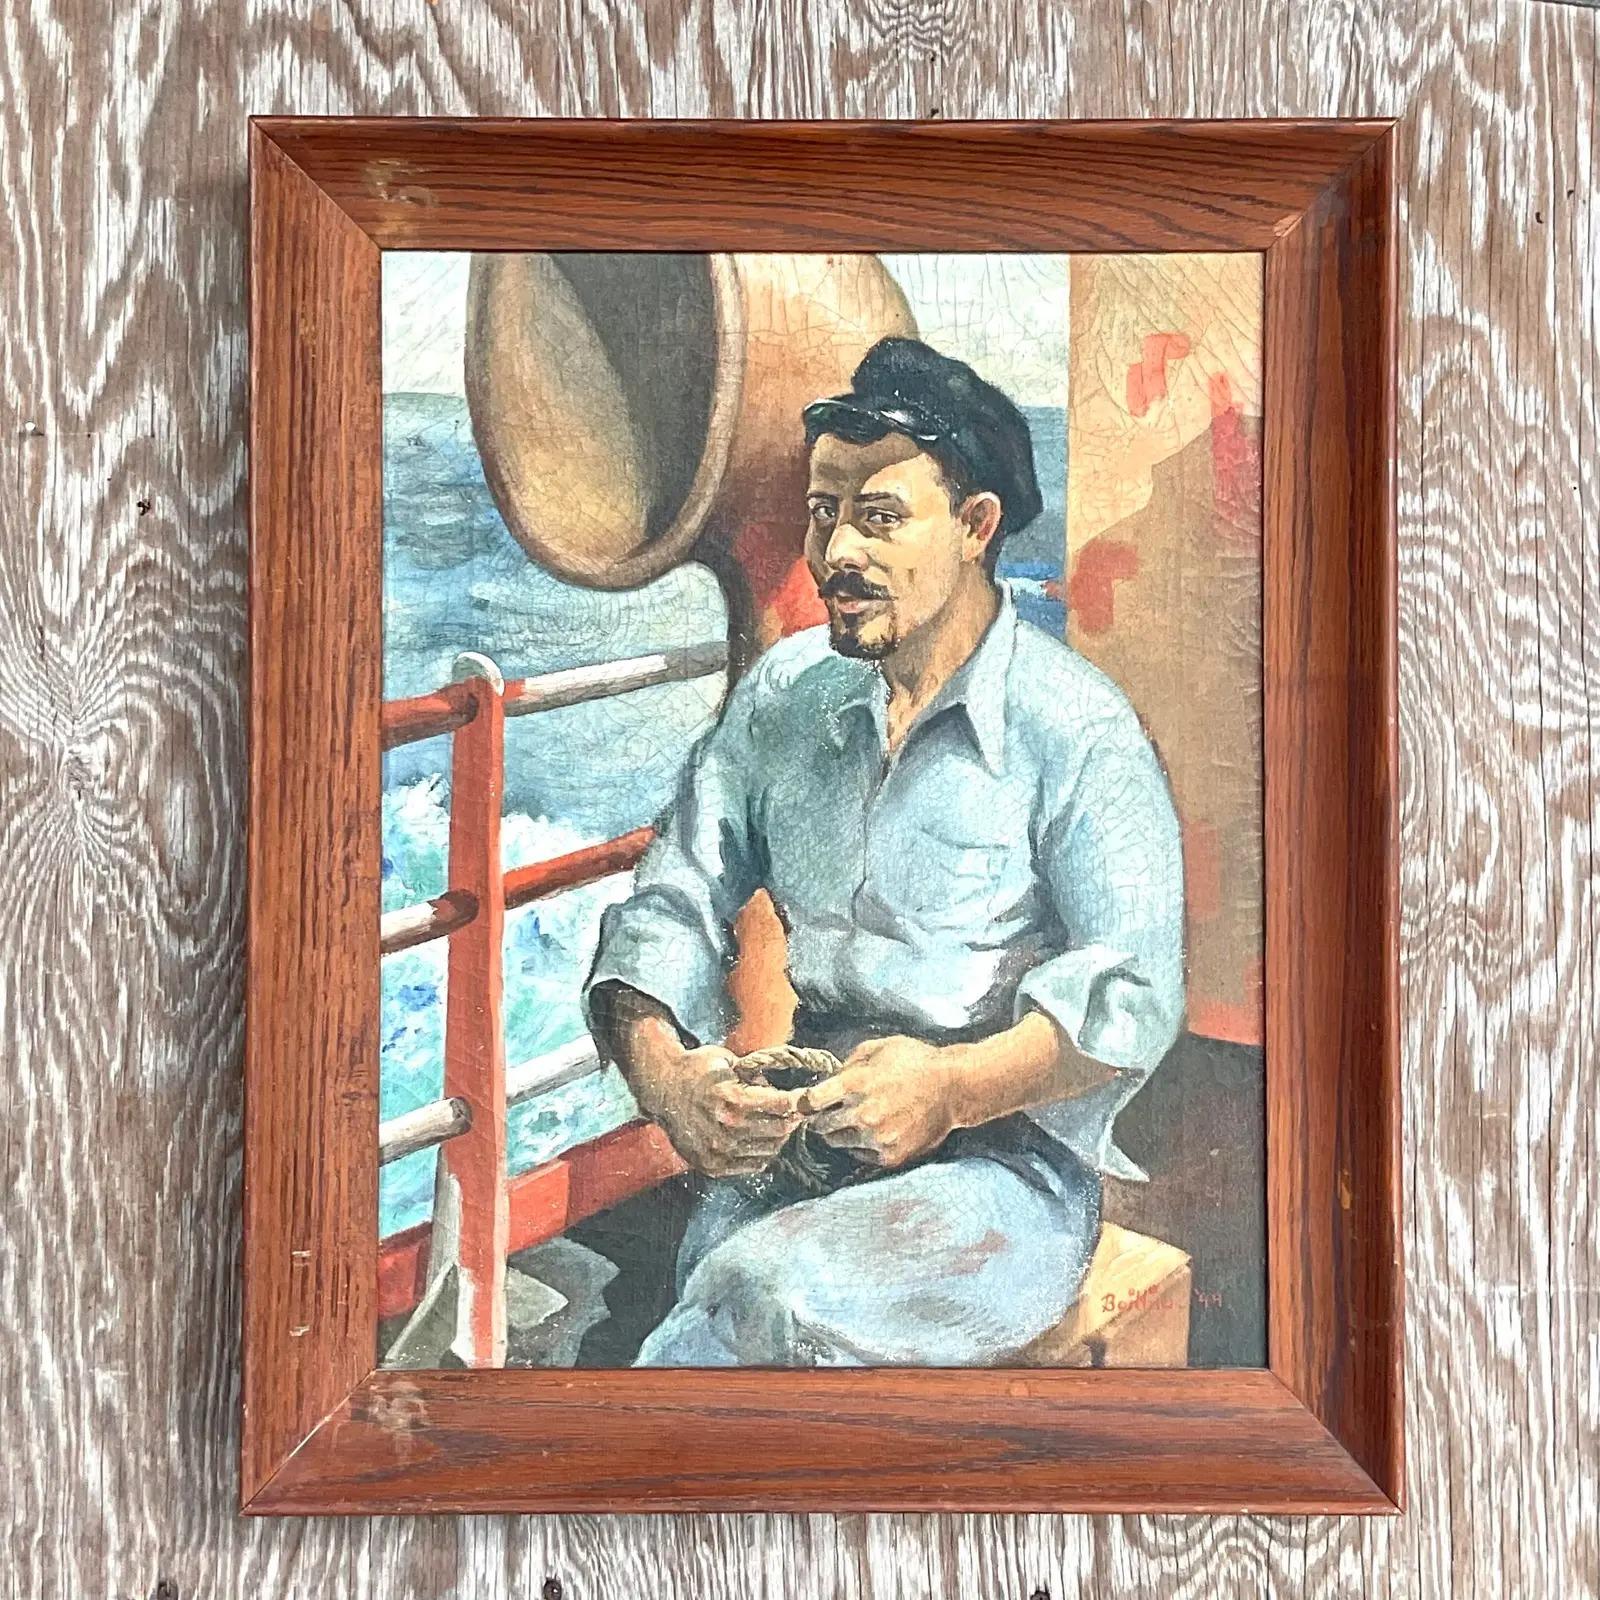 North American Vintage Boho Original Oil Painting of Fisherman Signed and Dated 1944